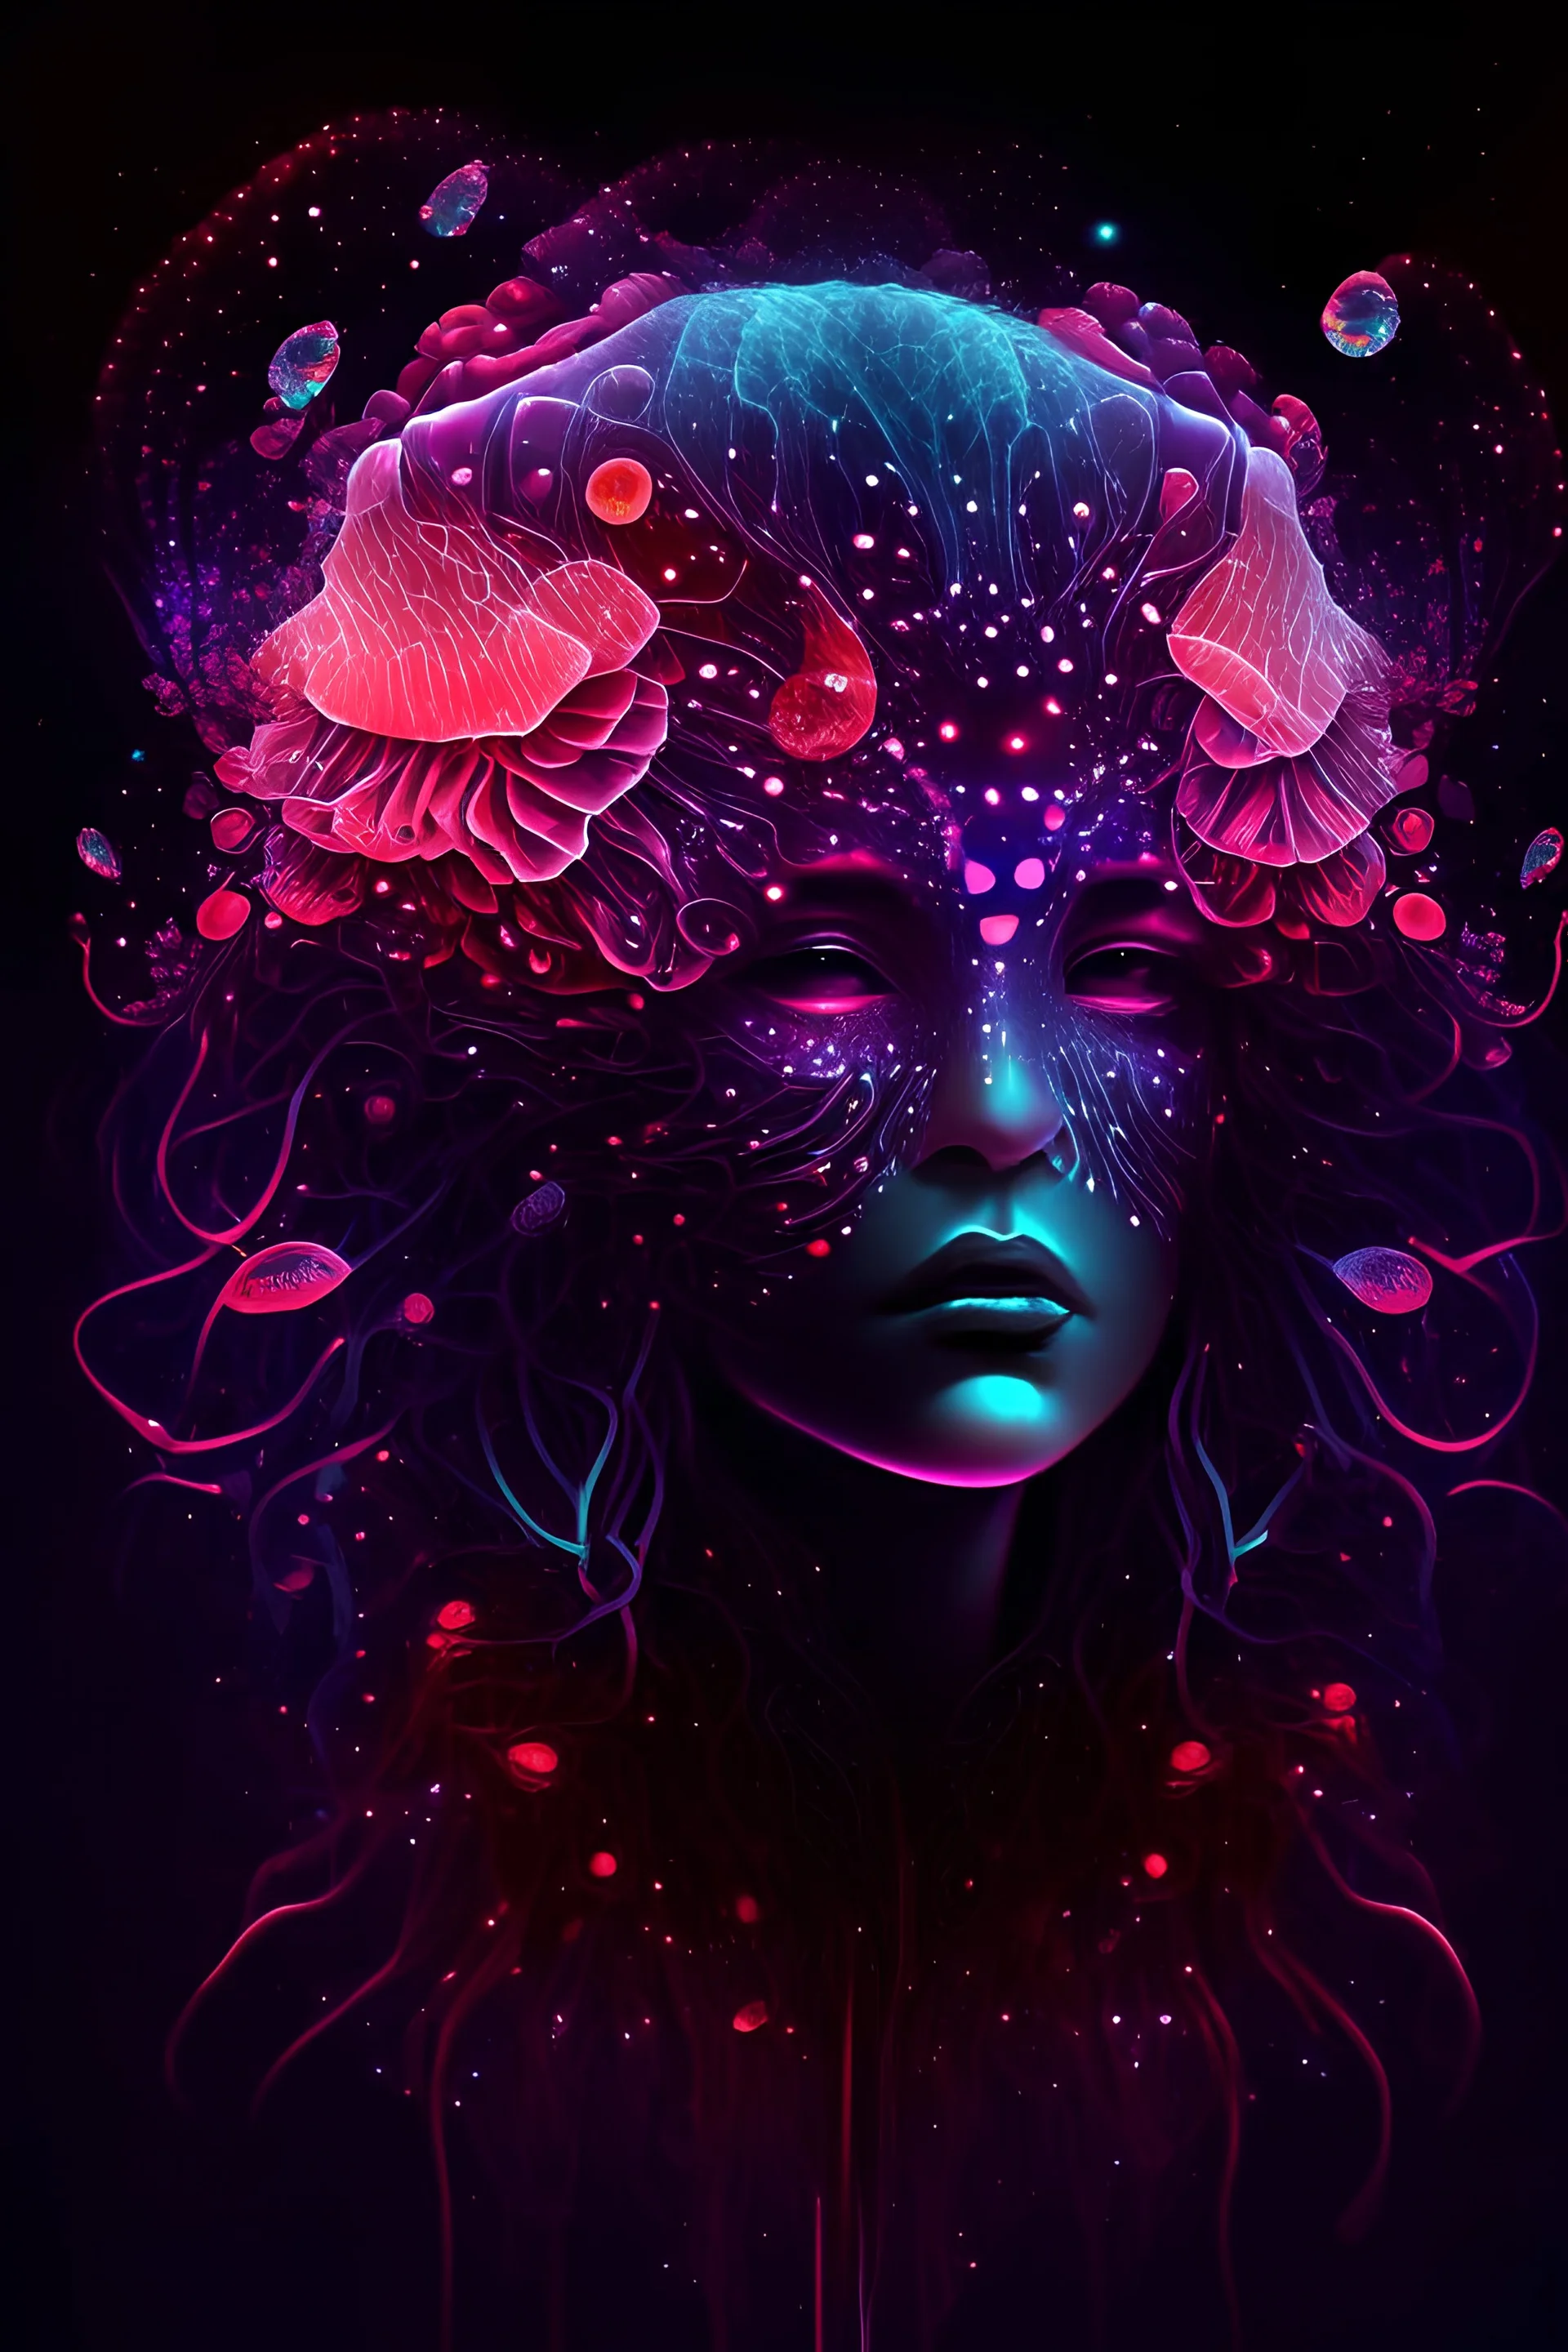 Beautiful giarl, jellyfish, mask neon crystal out her mind beautiful colorfully flowers and star pattern on fur front facing dark smooth colors high contrast background darkred tones,